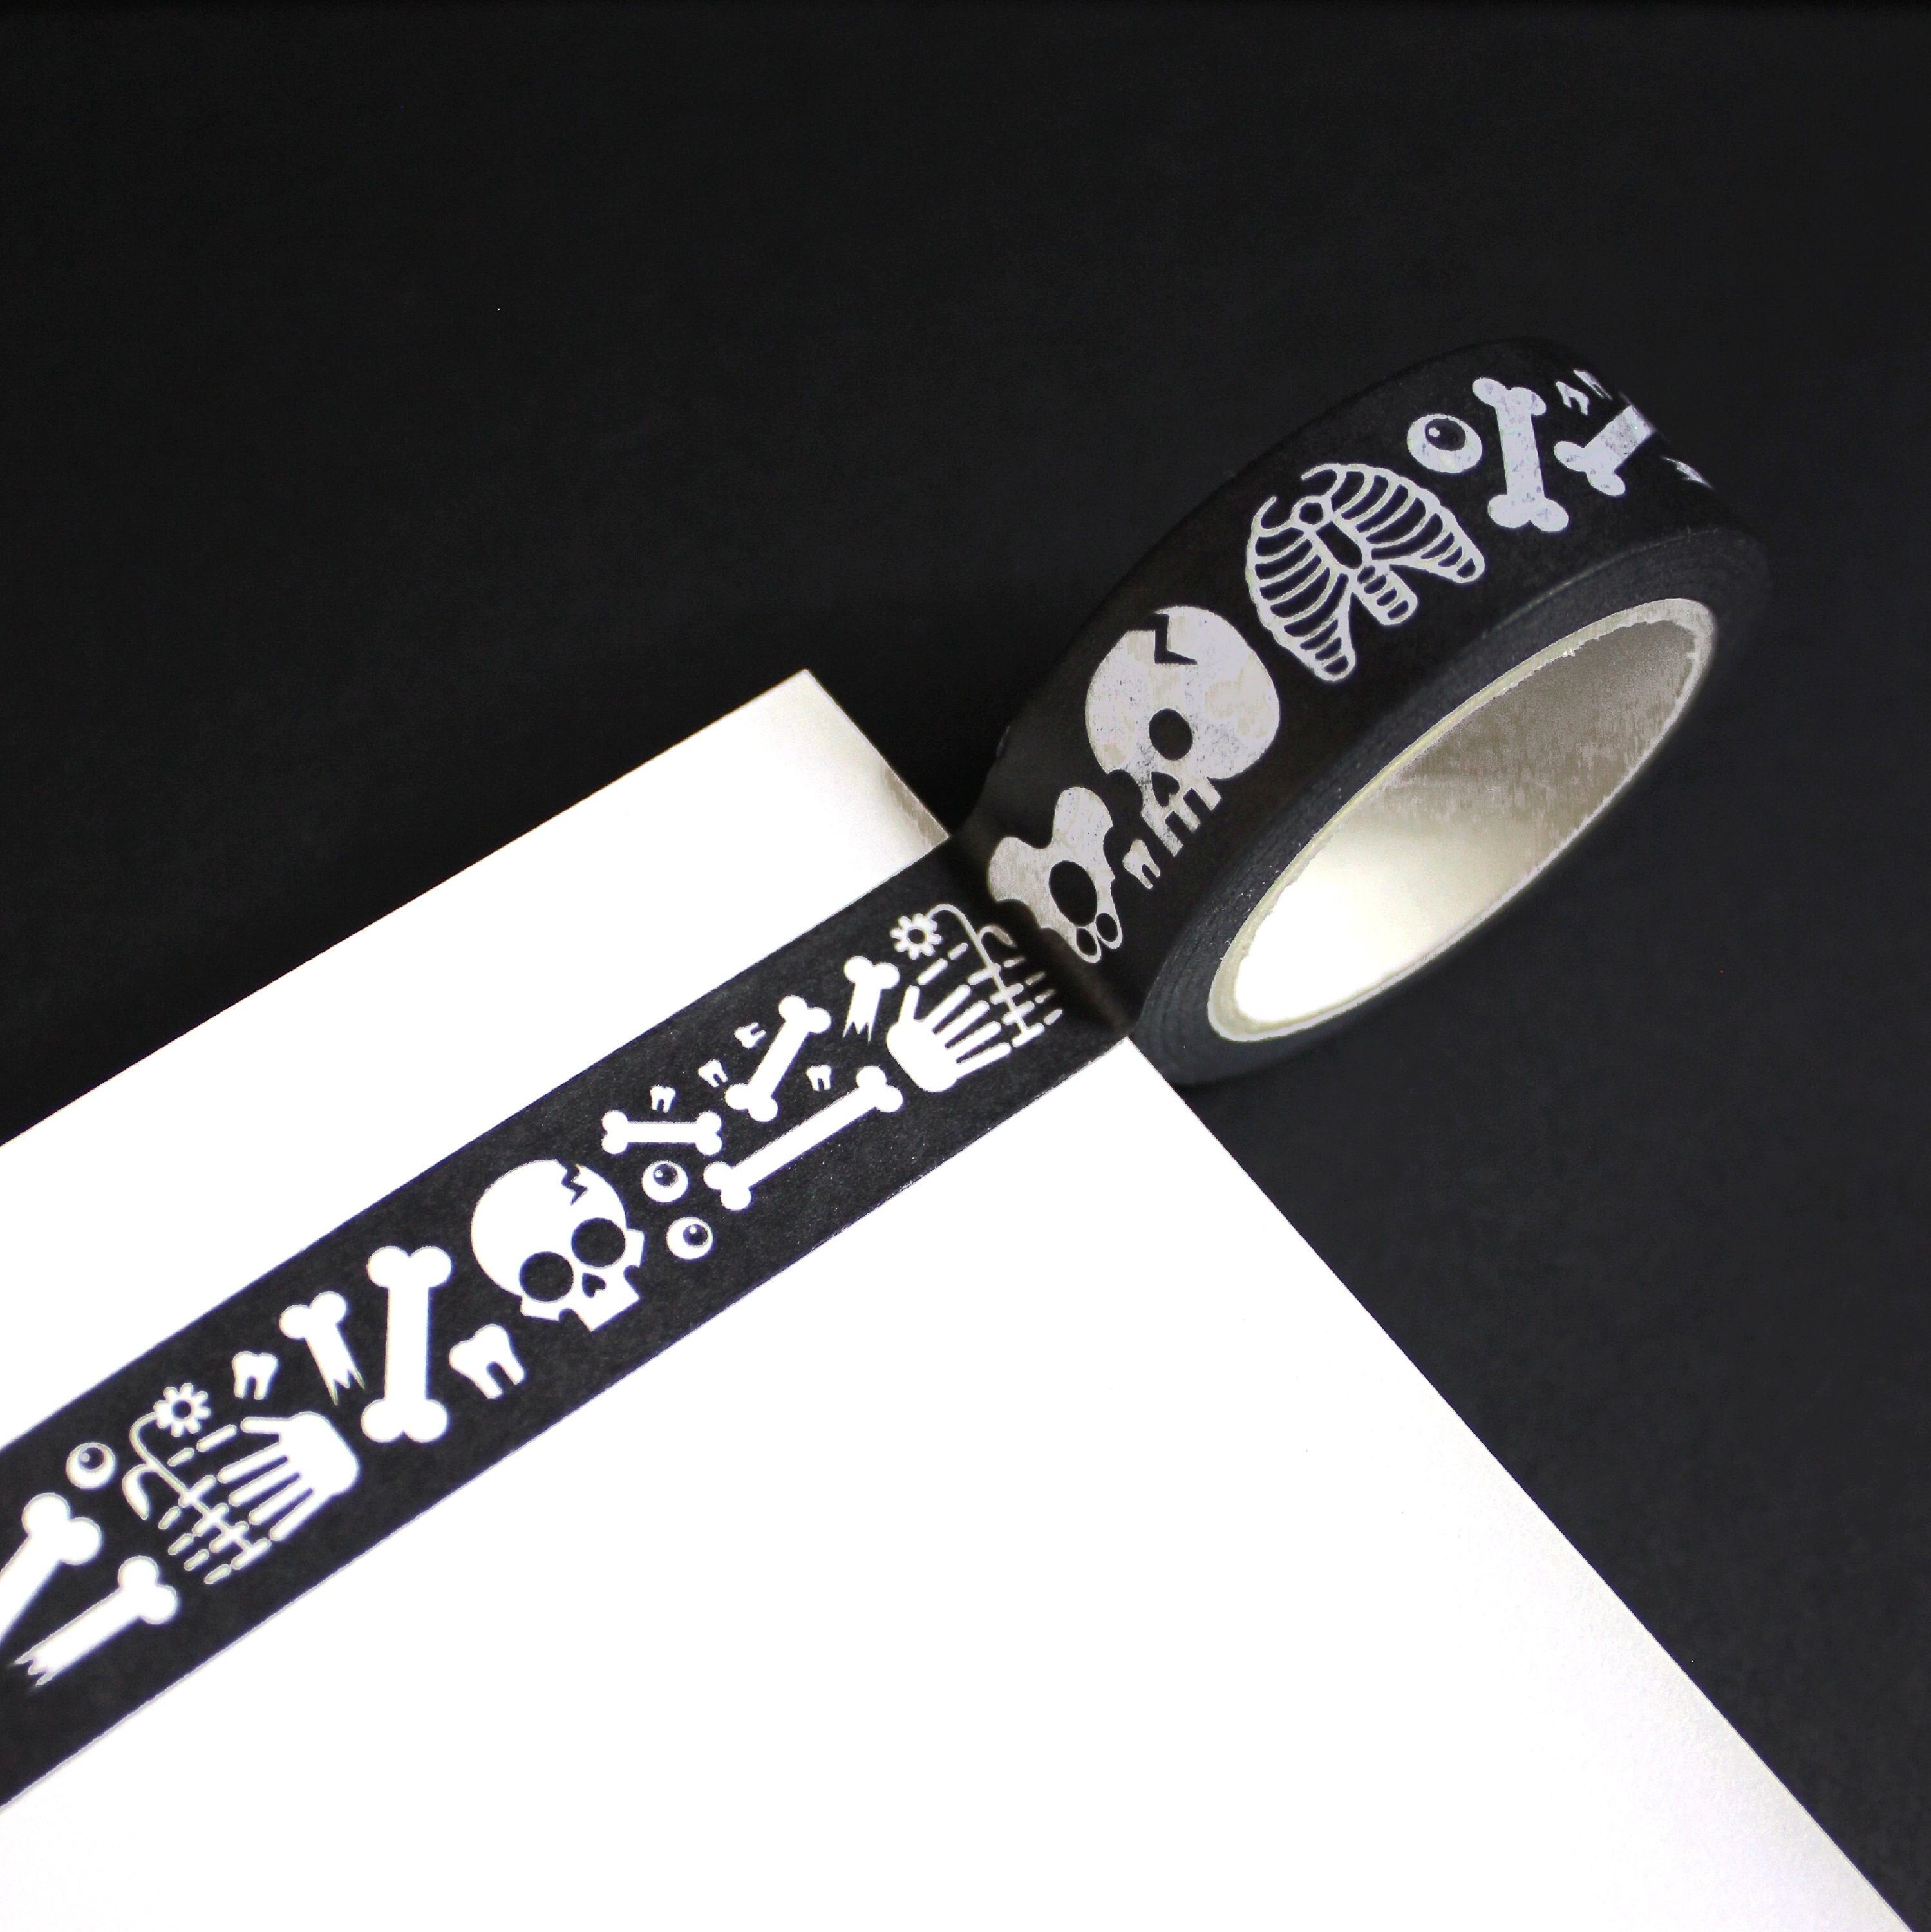 Haunted Houses' Spooky Halloween Witchy Washi Tape Designed by Leigh Luna —  Aviva Maï Artzy (The Washi Station)